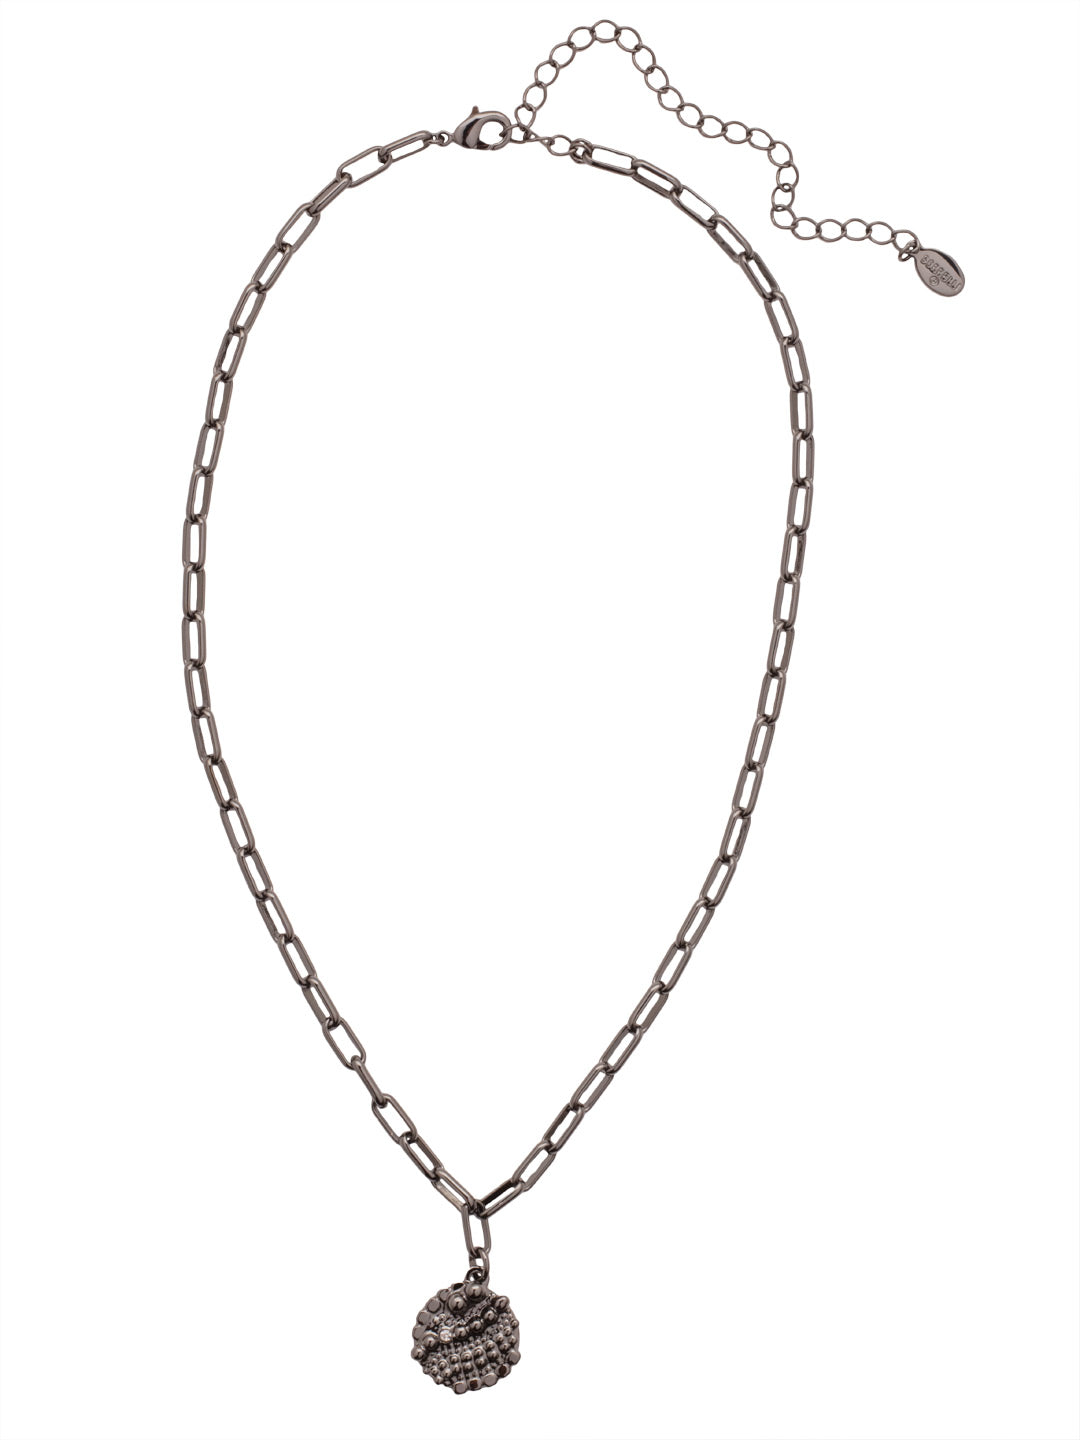 Khaleesi Pendant Necklace - 4NFC15GMCRY - <p>The Khaleesi Pendant Necklace features a scale-like detailed metal disk, dangling from an adjustable paperclip chain, and secured with a lobster claw clasp. From Sorrelli's Crystal collection in our Gun Metal finish.</p>